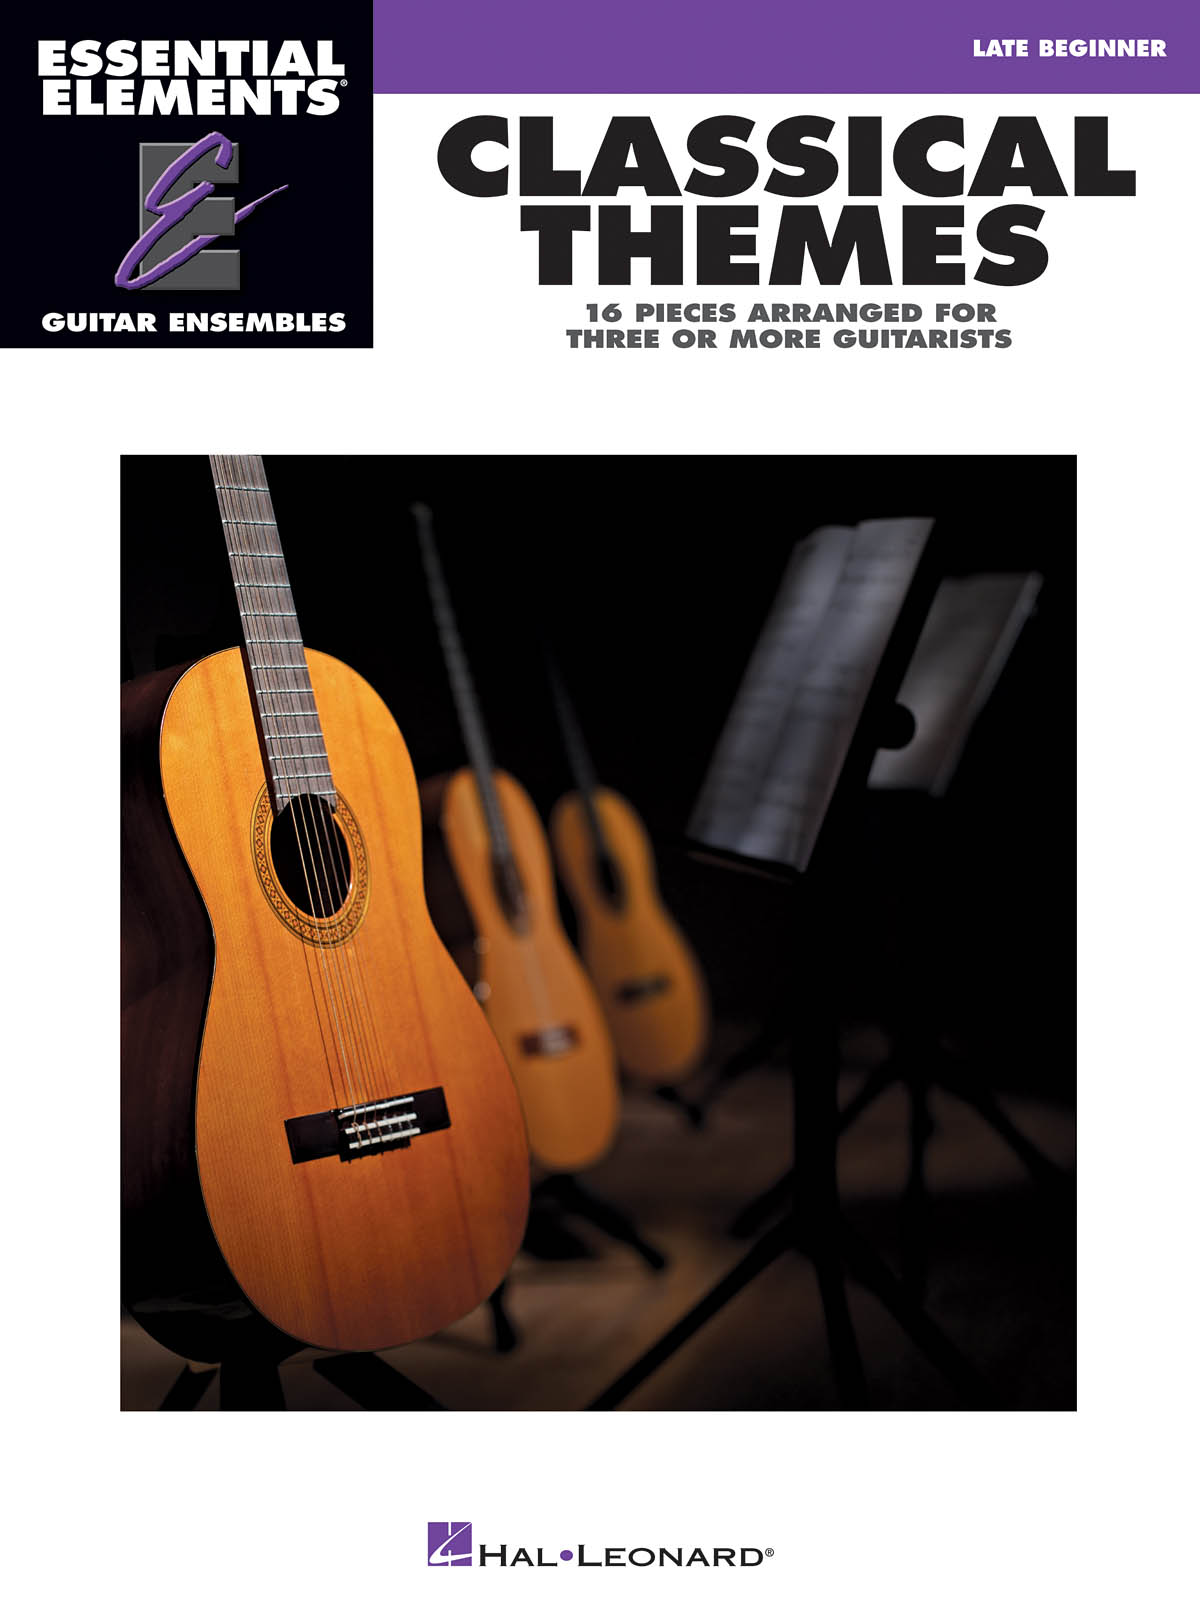 Essential Elements Guitar Ens - Classical Themes - 16 Pieces Arranged for Three or More Guitarists